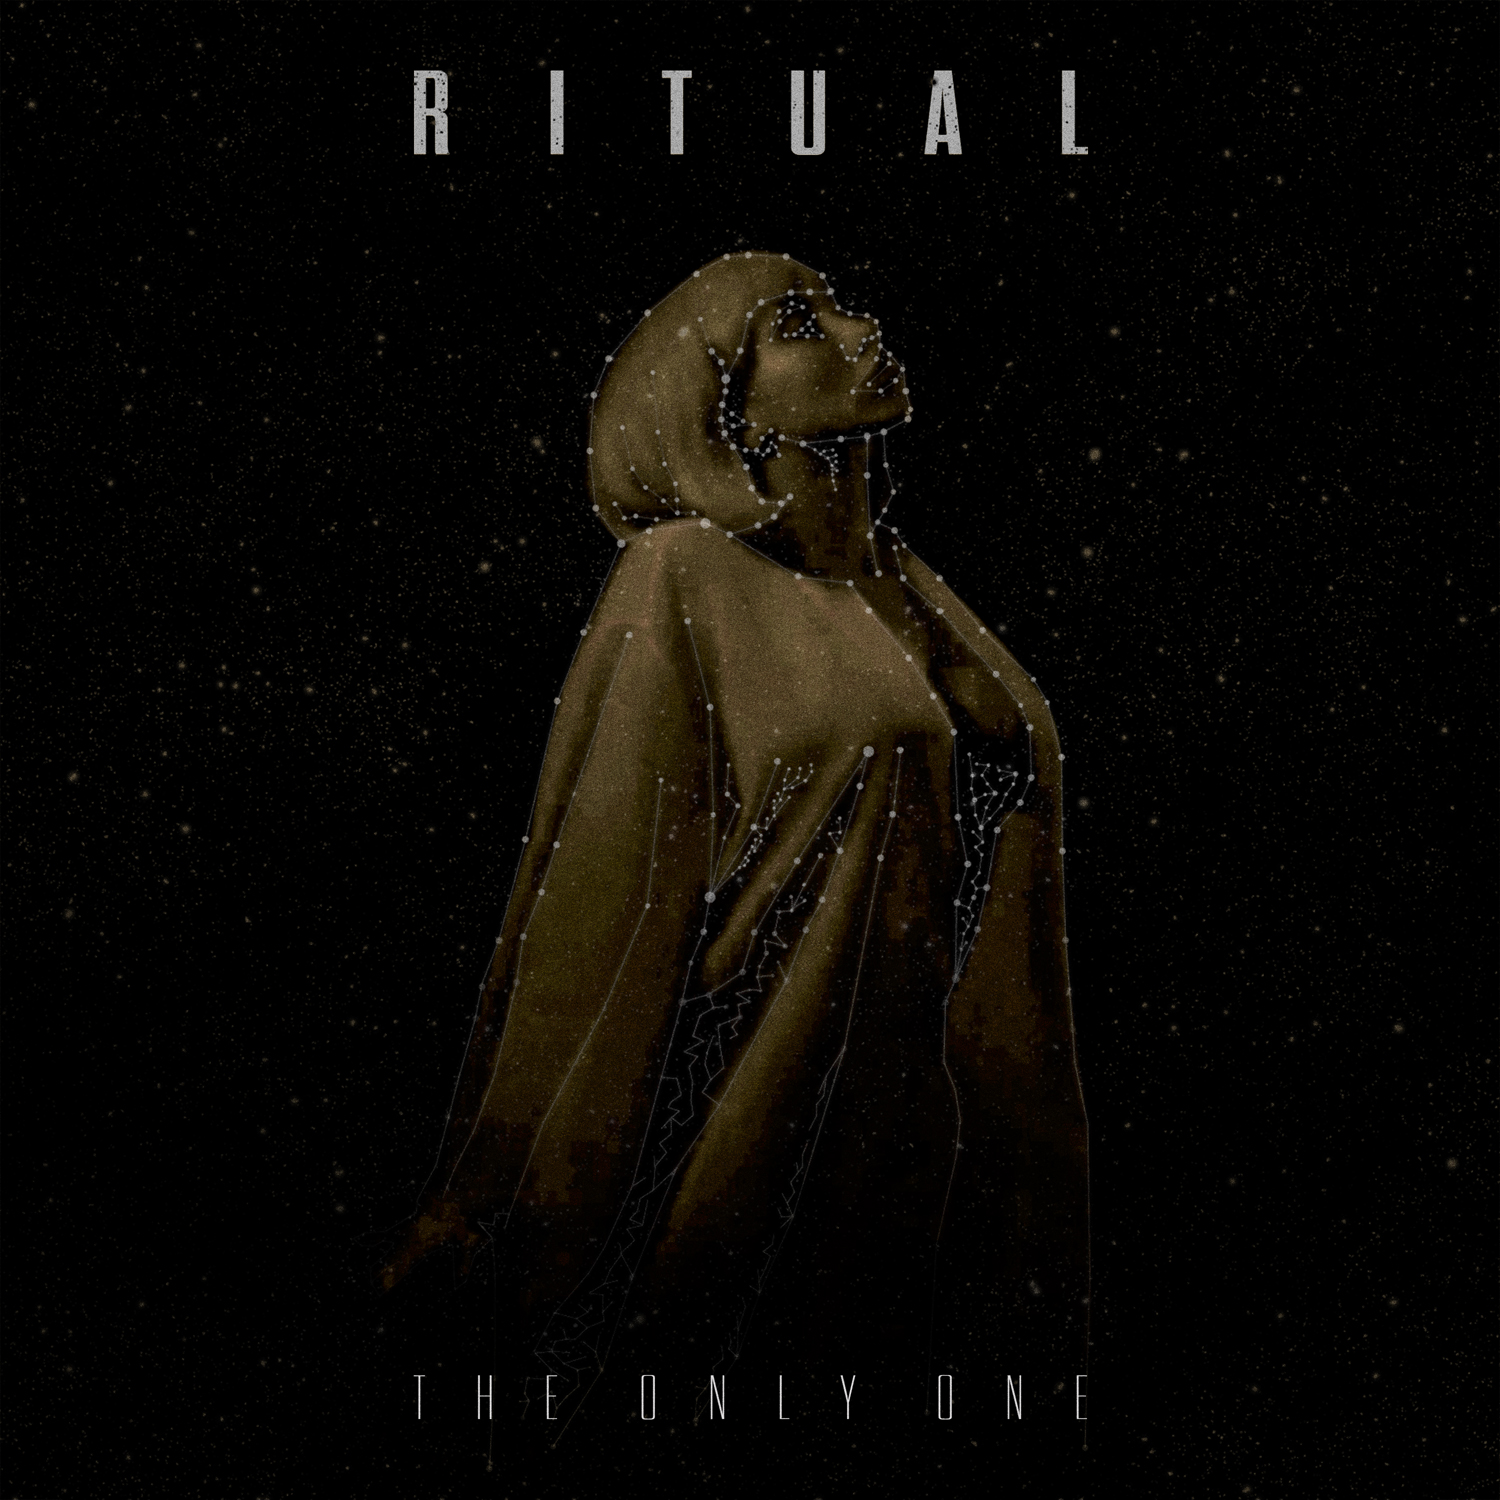 ritual - the only one